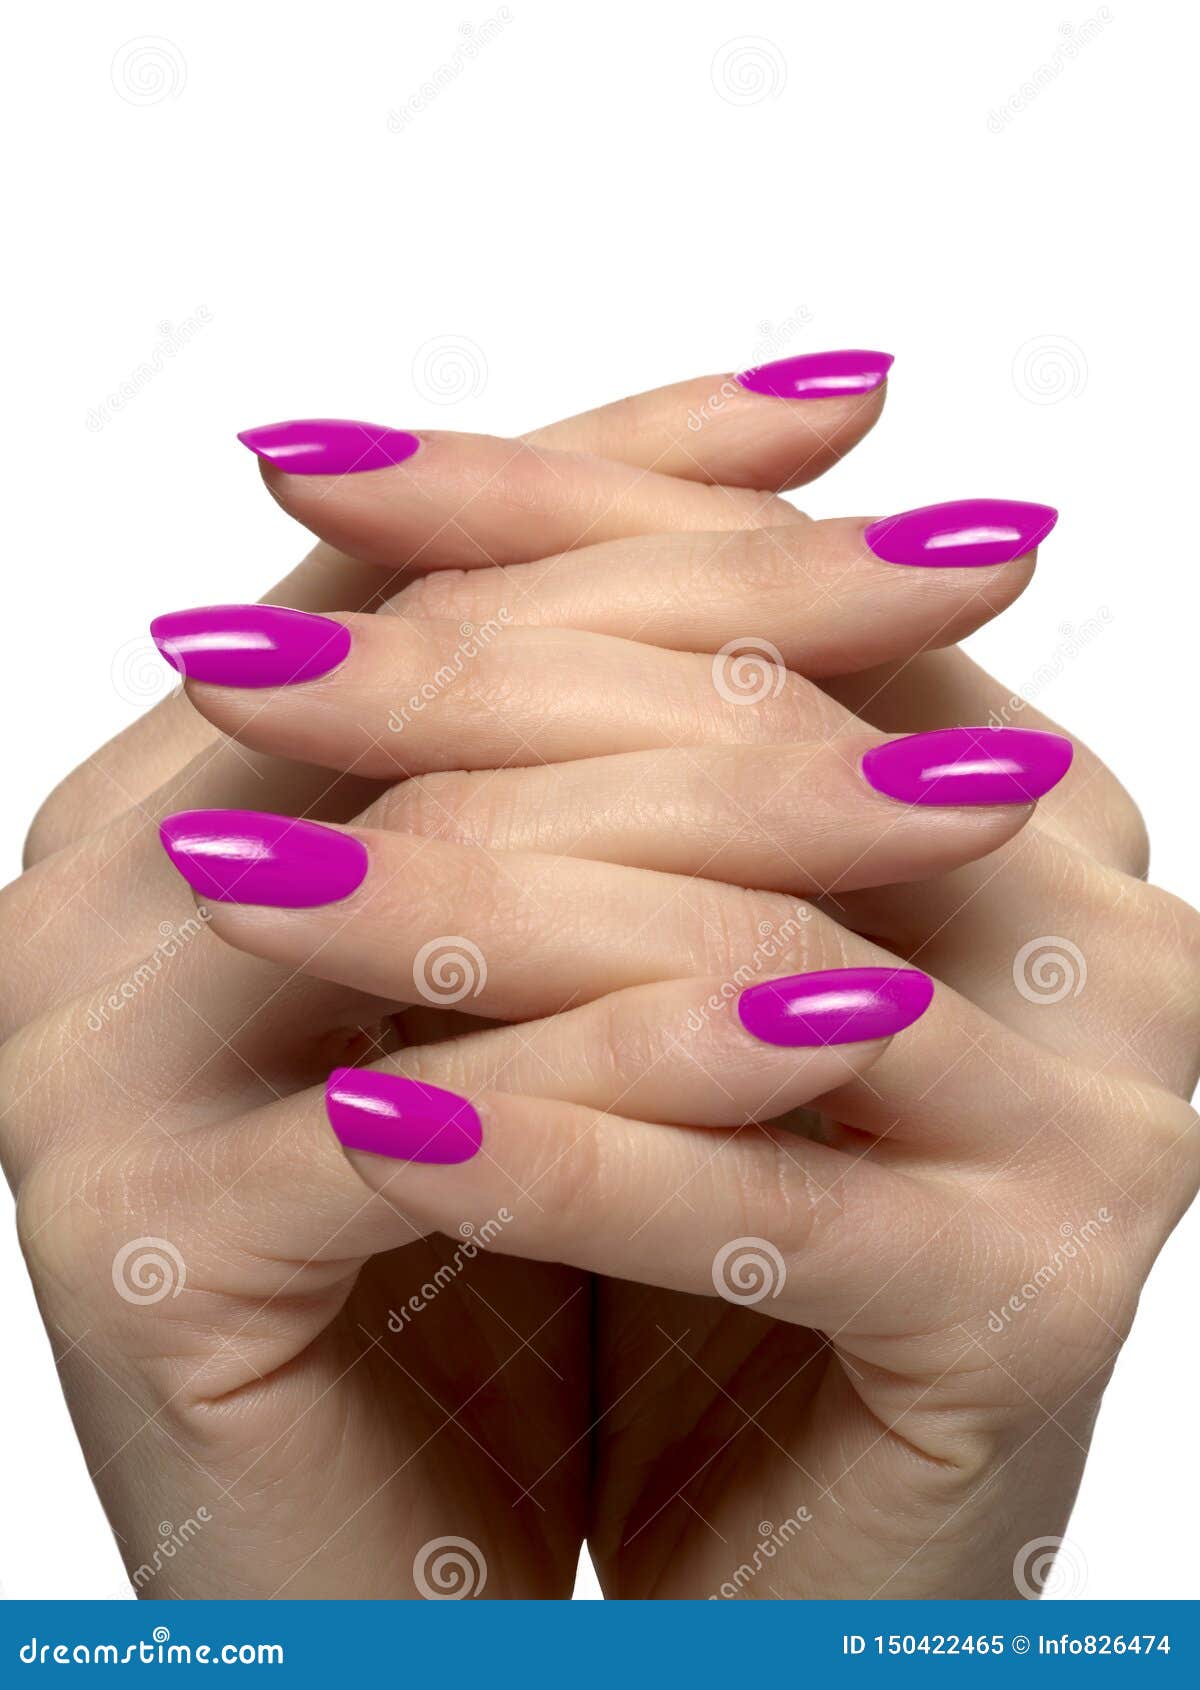 woman hands crossed with fucsia nails manicure